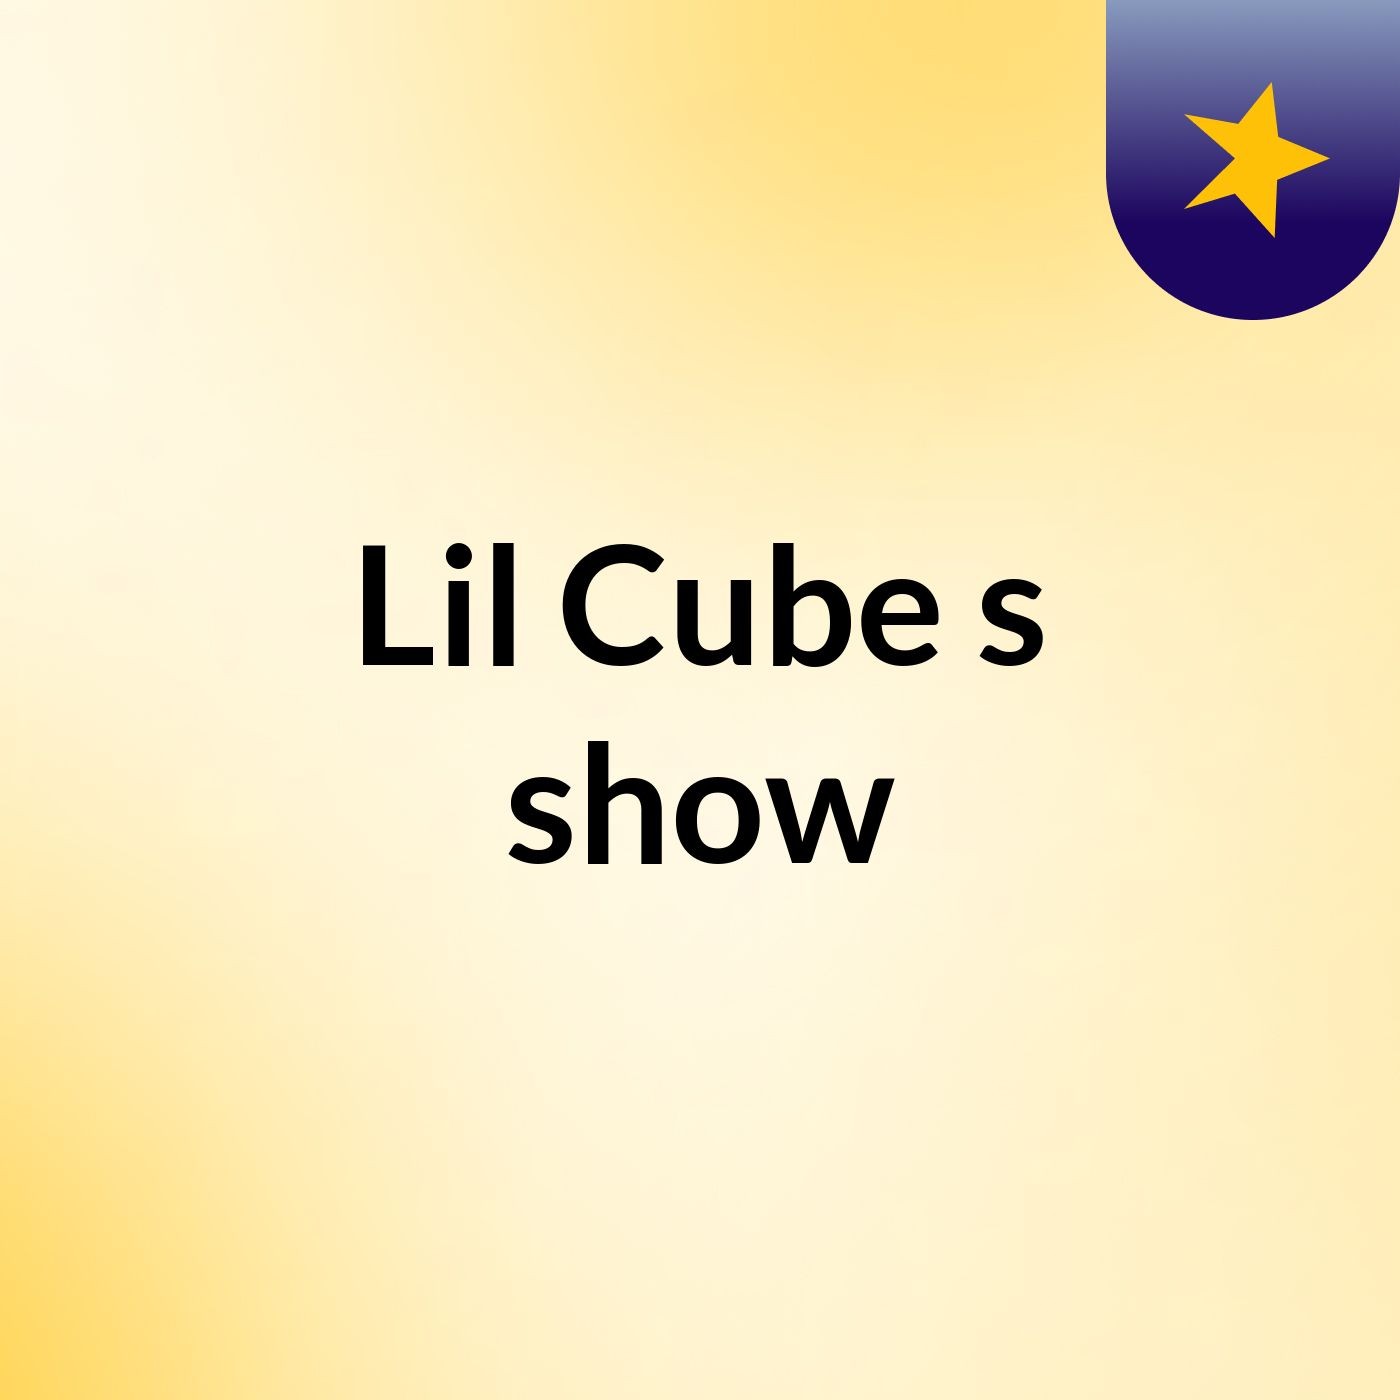 Lil Cube's show